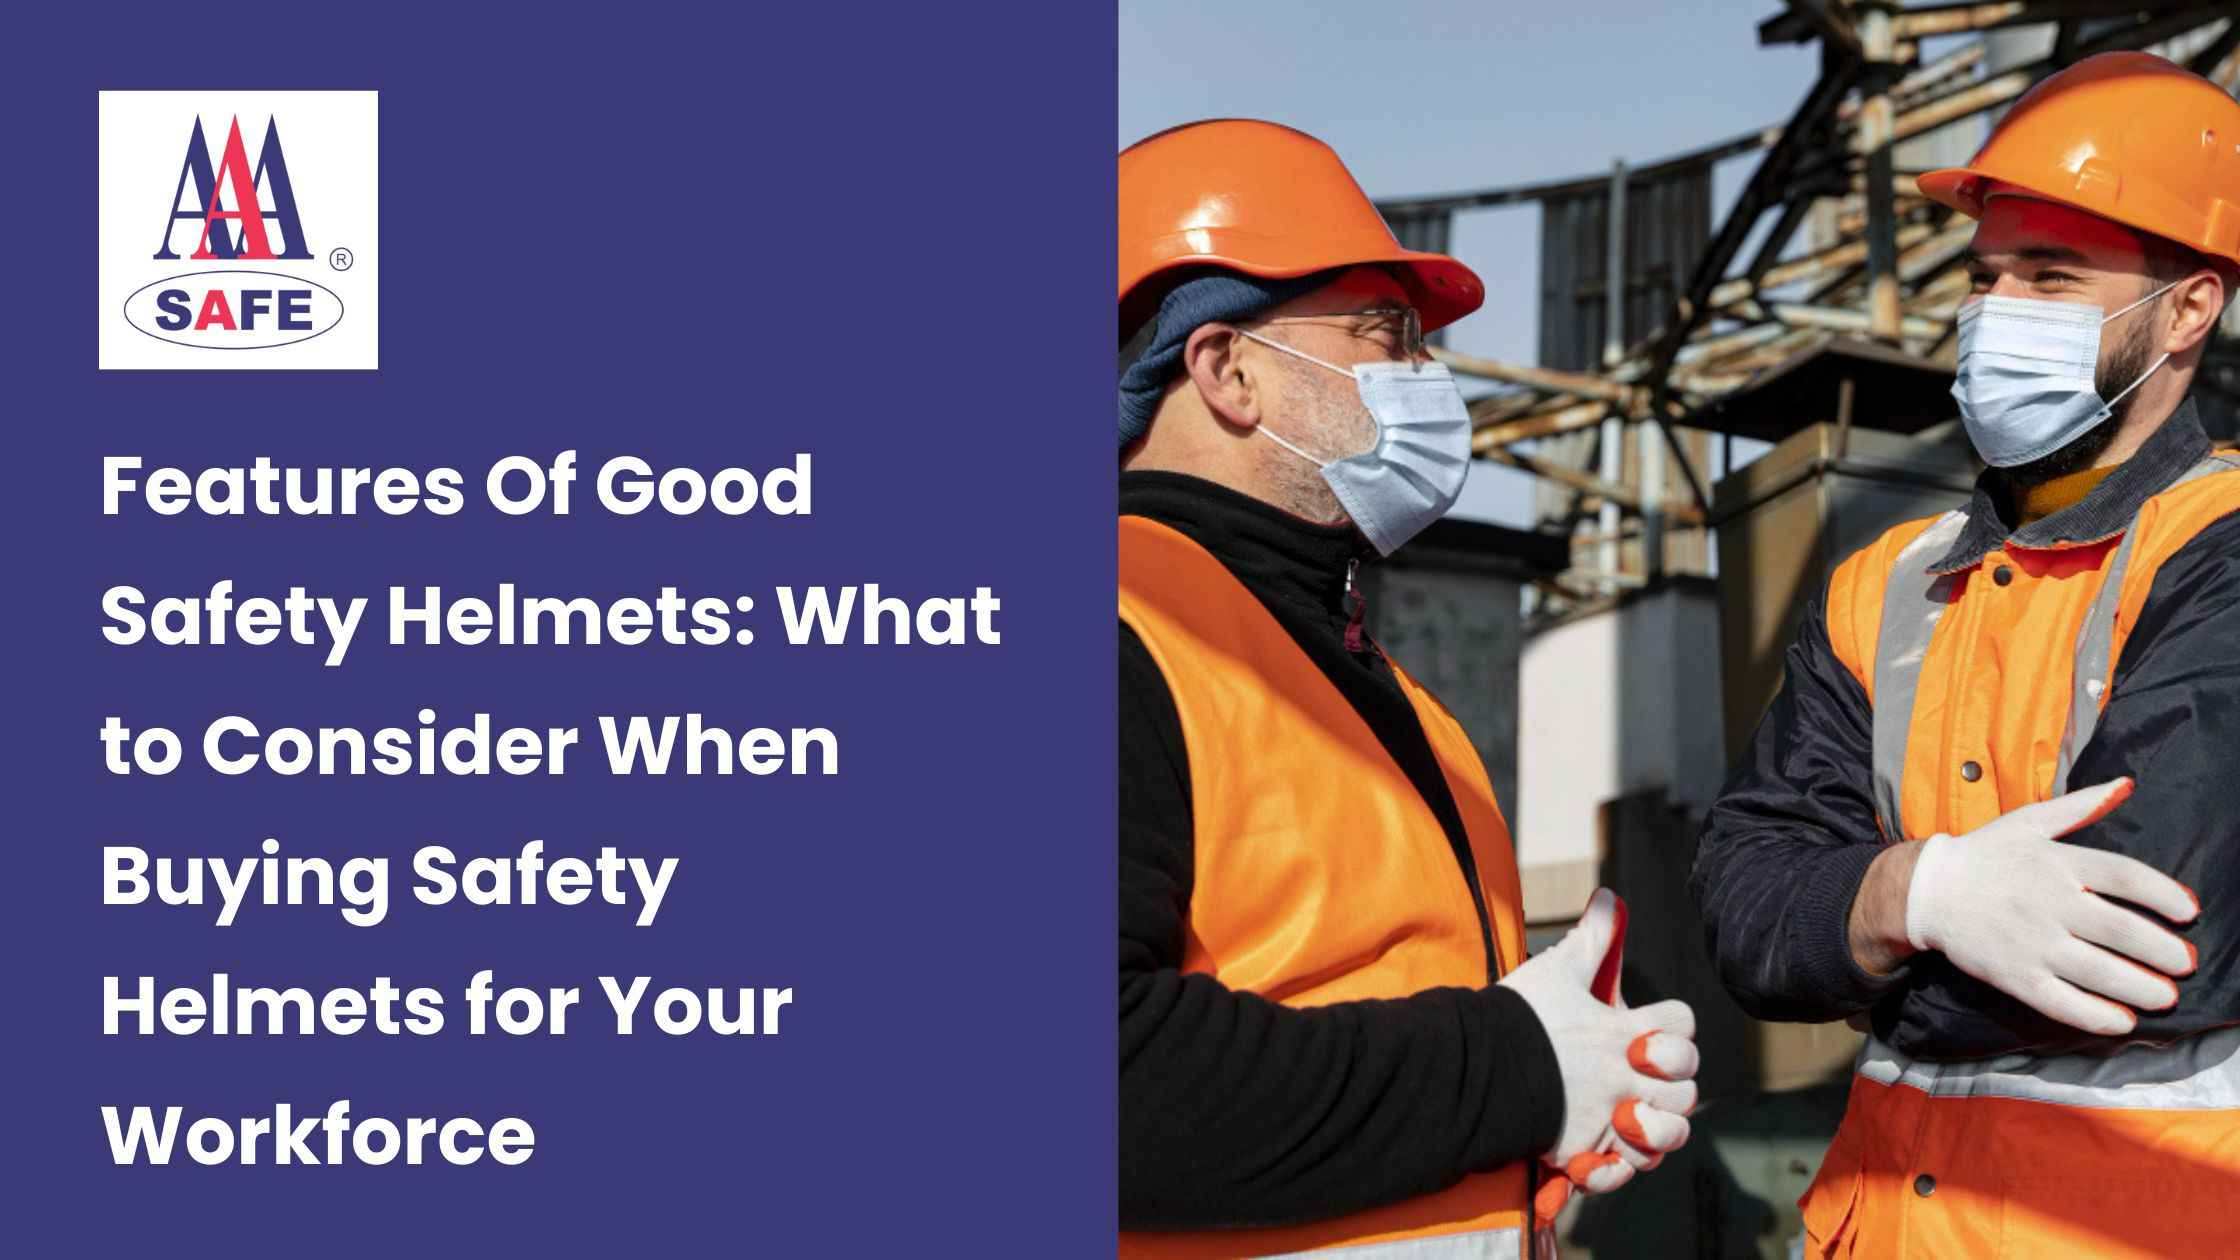 Features Of Good Safety Helmets: What to Consider When Buying Safety Helmets for Your Workforce